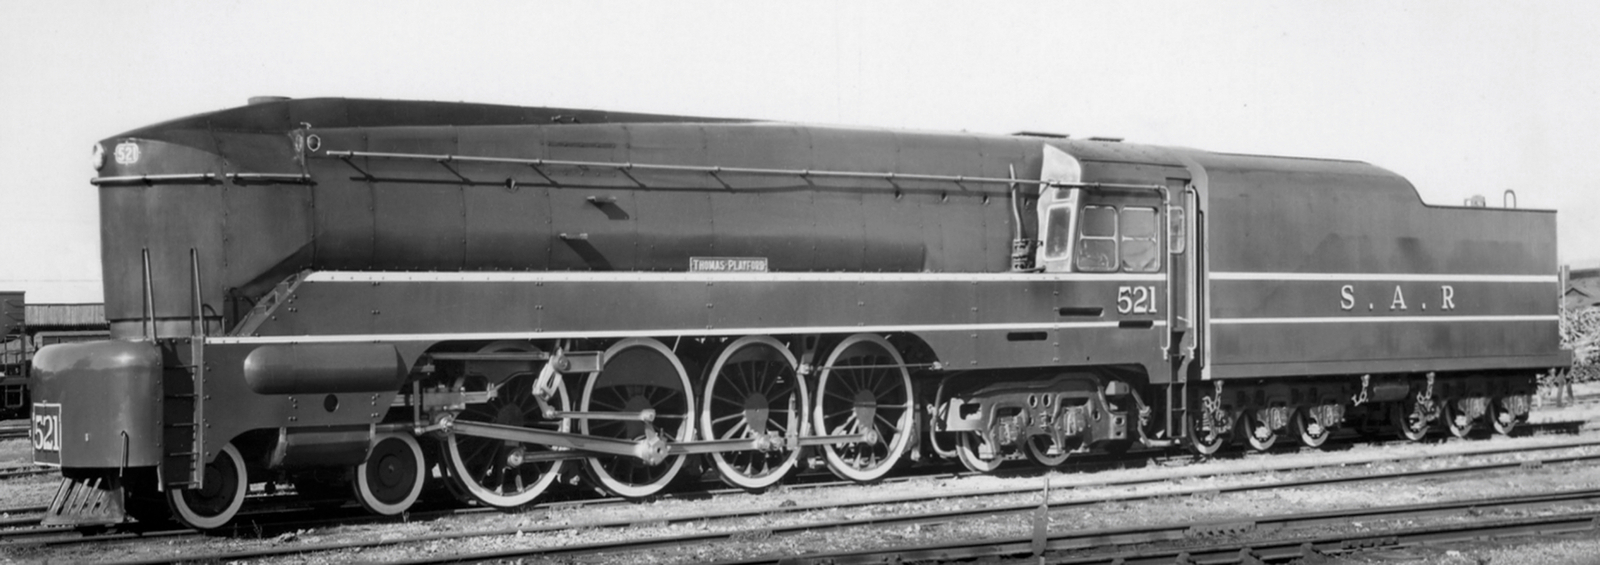 No. 521 immediately after its delivery in February 1944